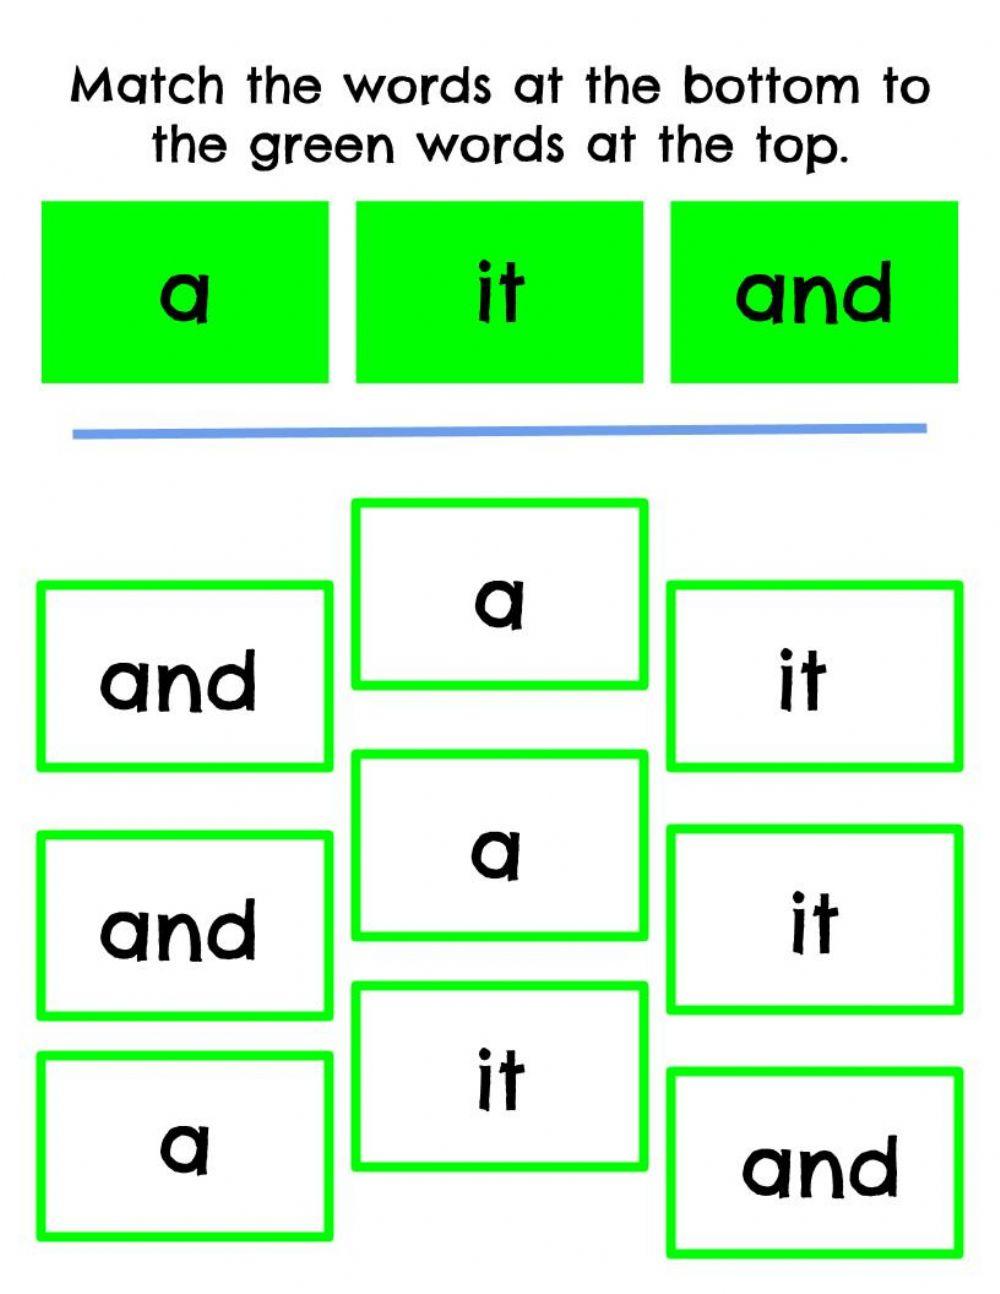 Match Sight Words - a, it, and